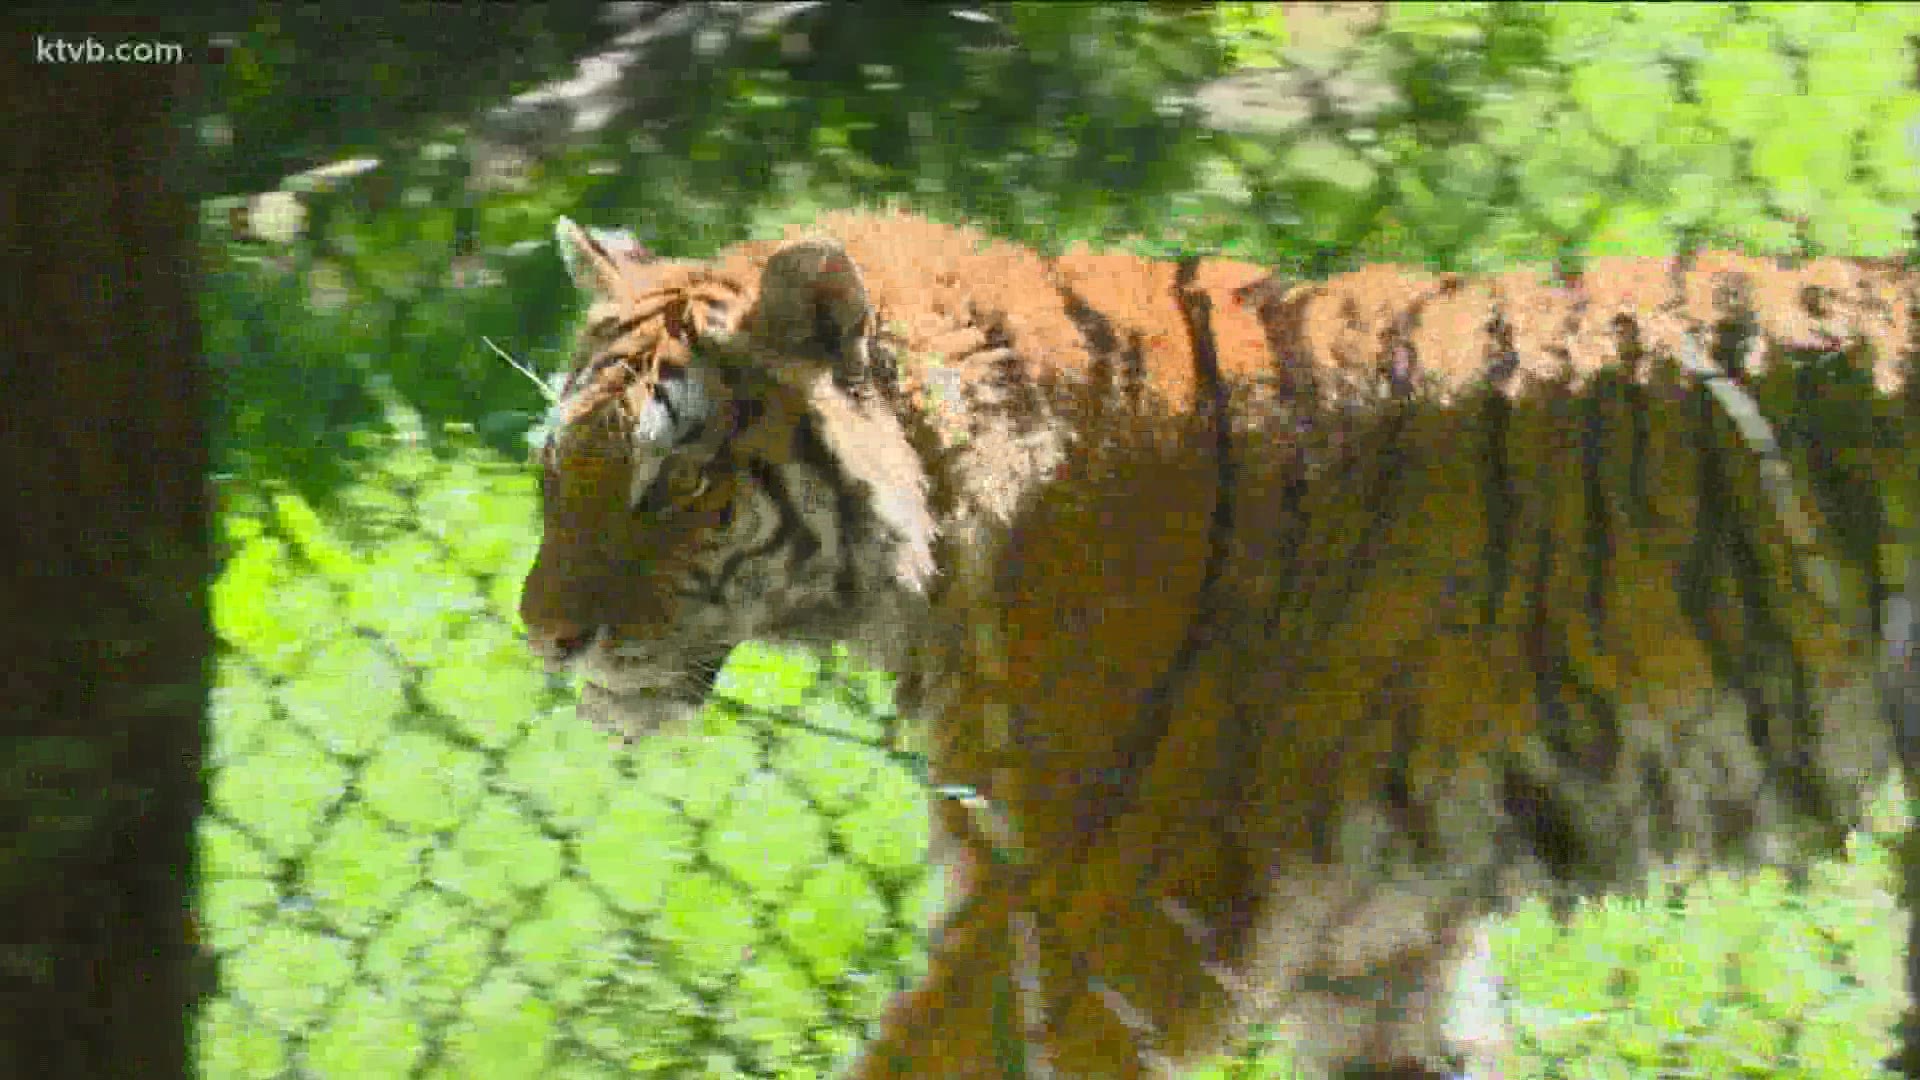 The Amur tiger named Diana died earlier this week while under anesthesia during a physical exam.